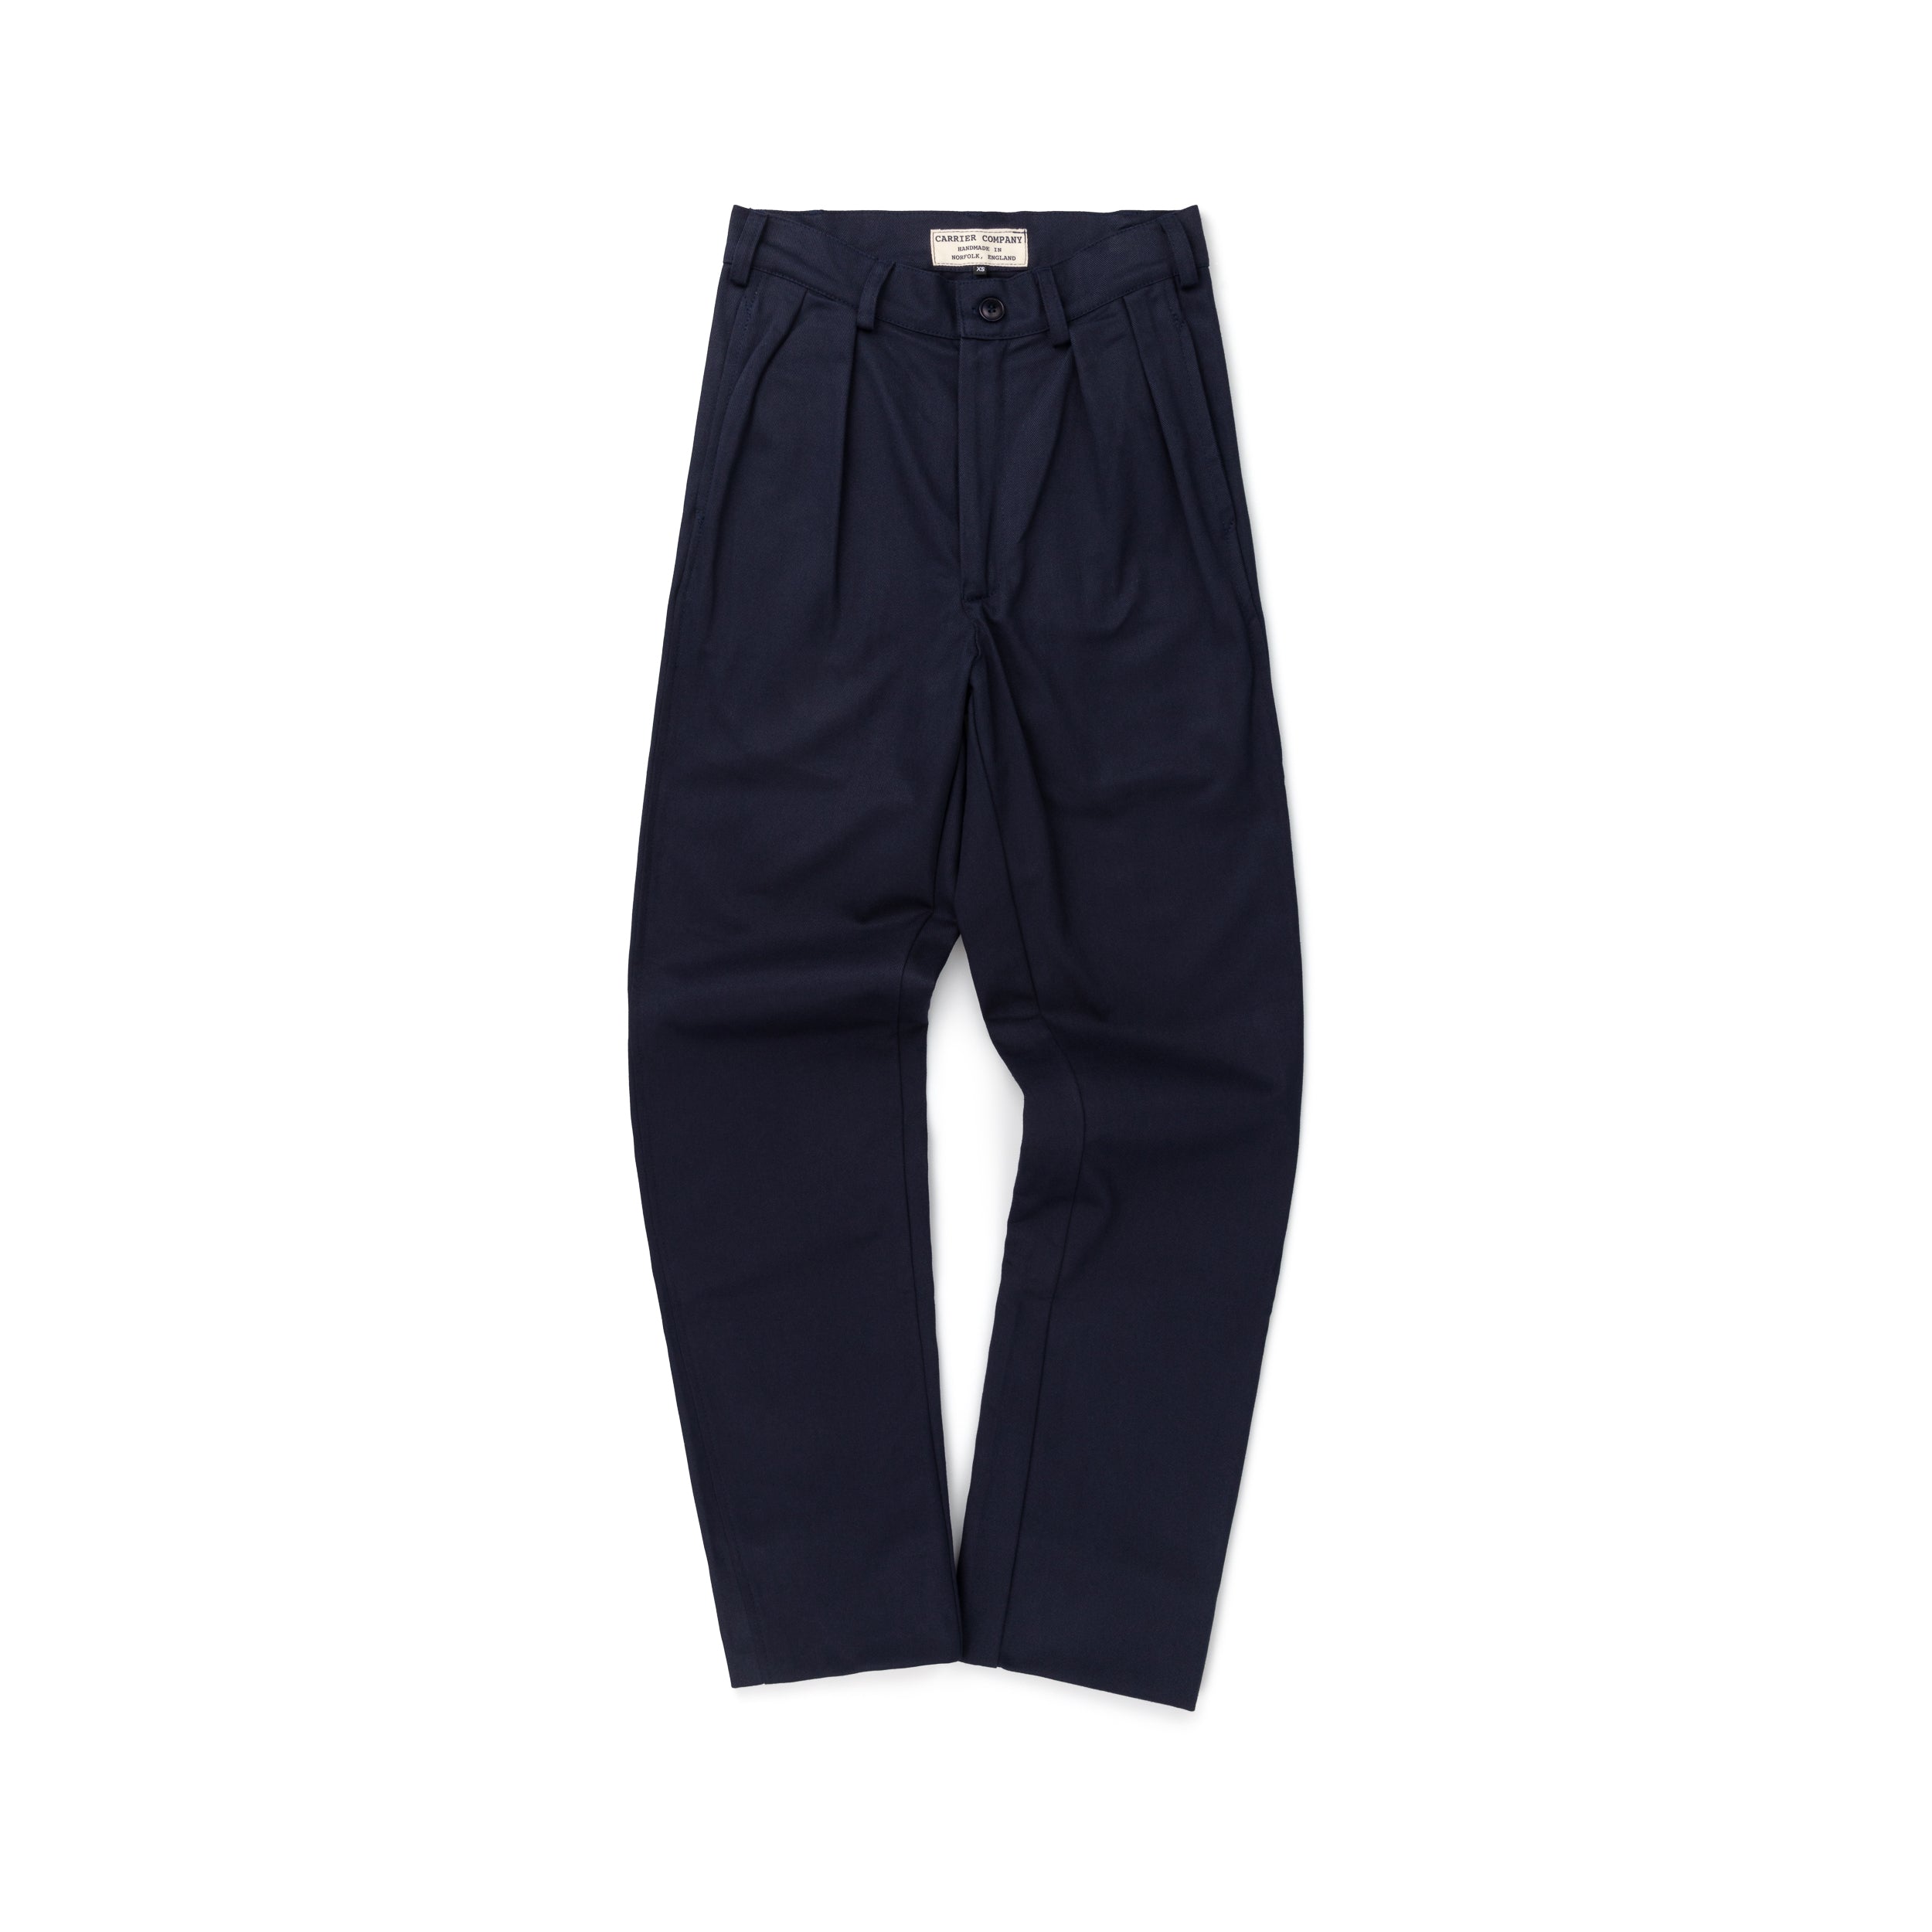 Carrier Company Classic Trouser in Navy Drill